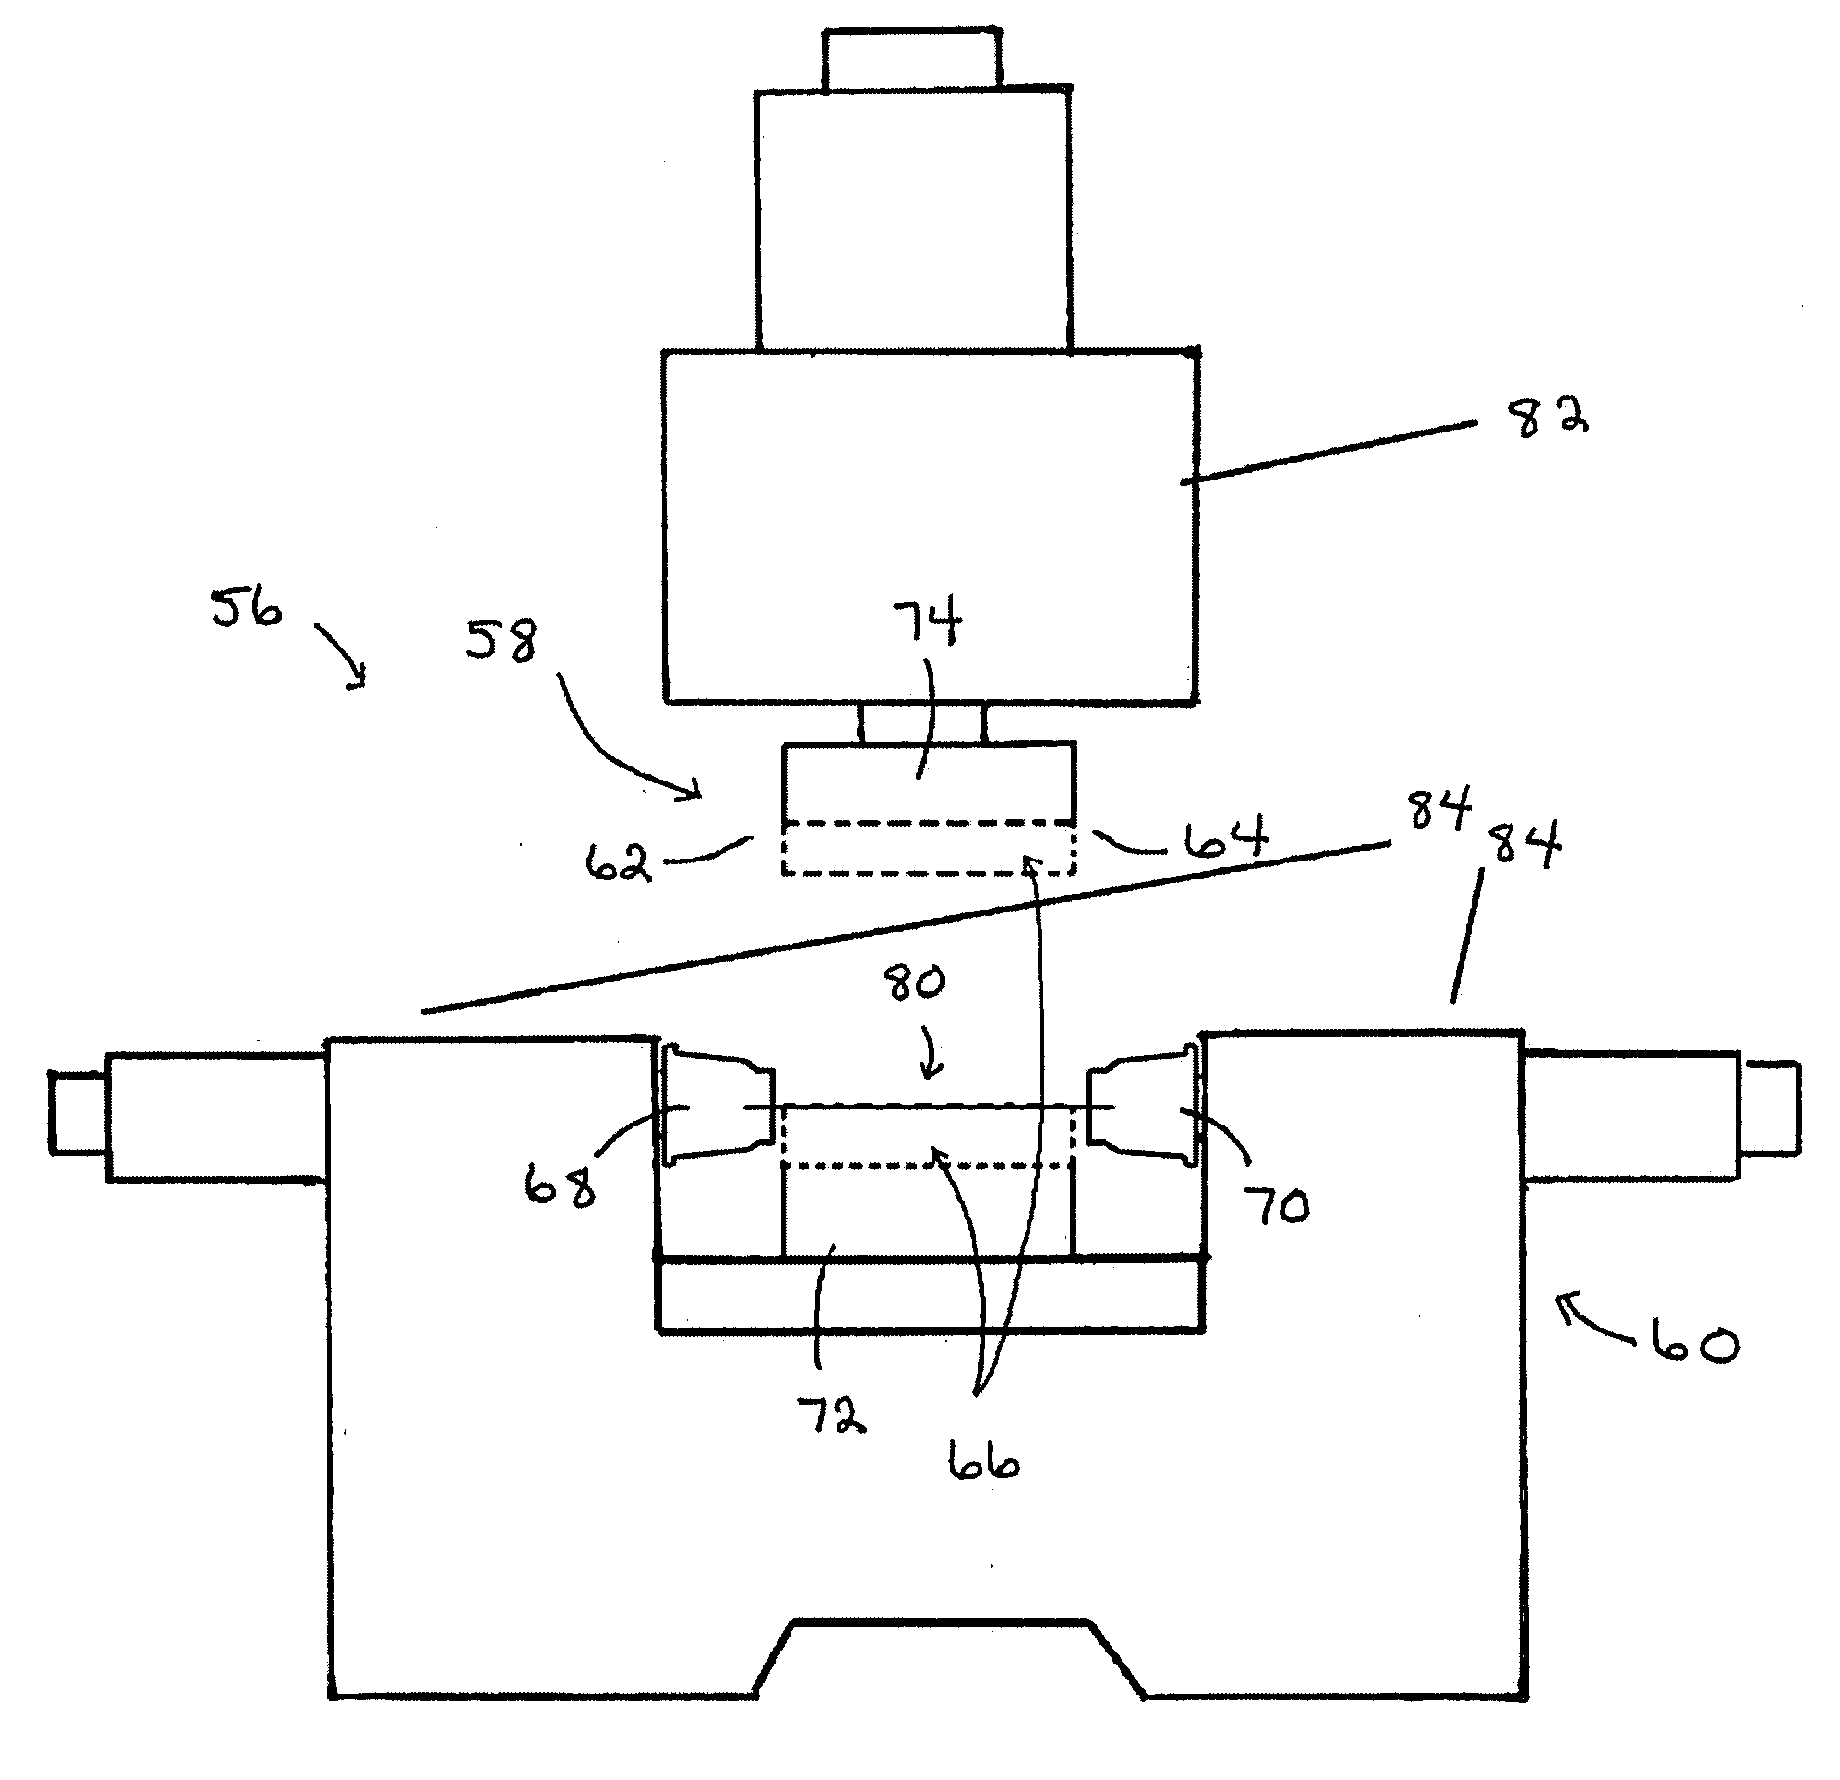 Apparatus and method for forging premium coupling blanks